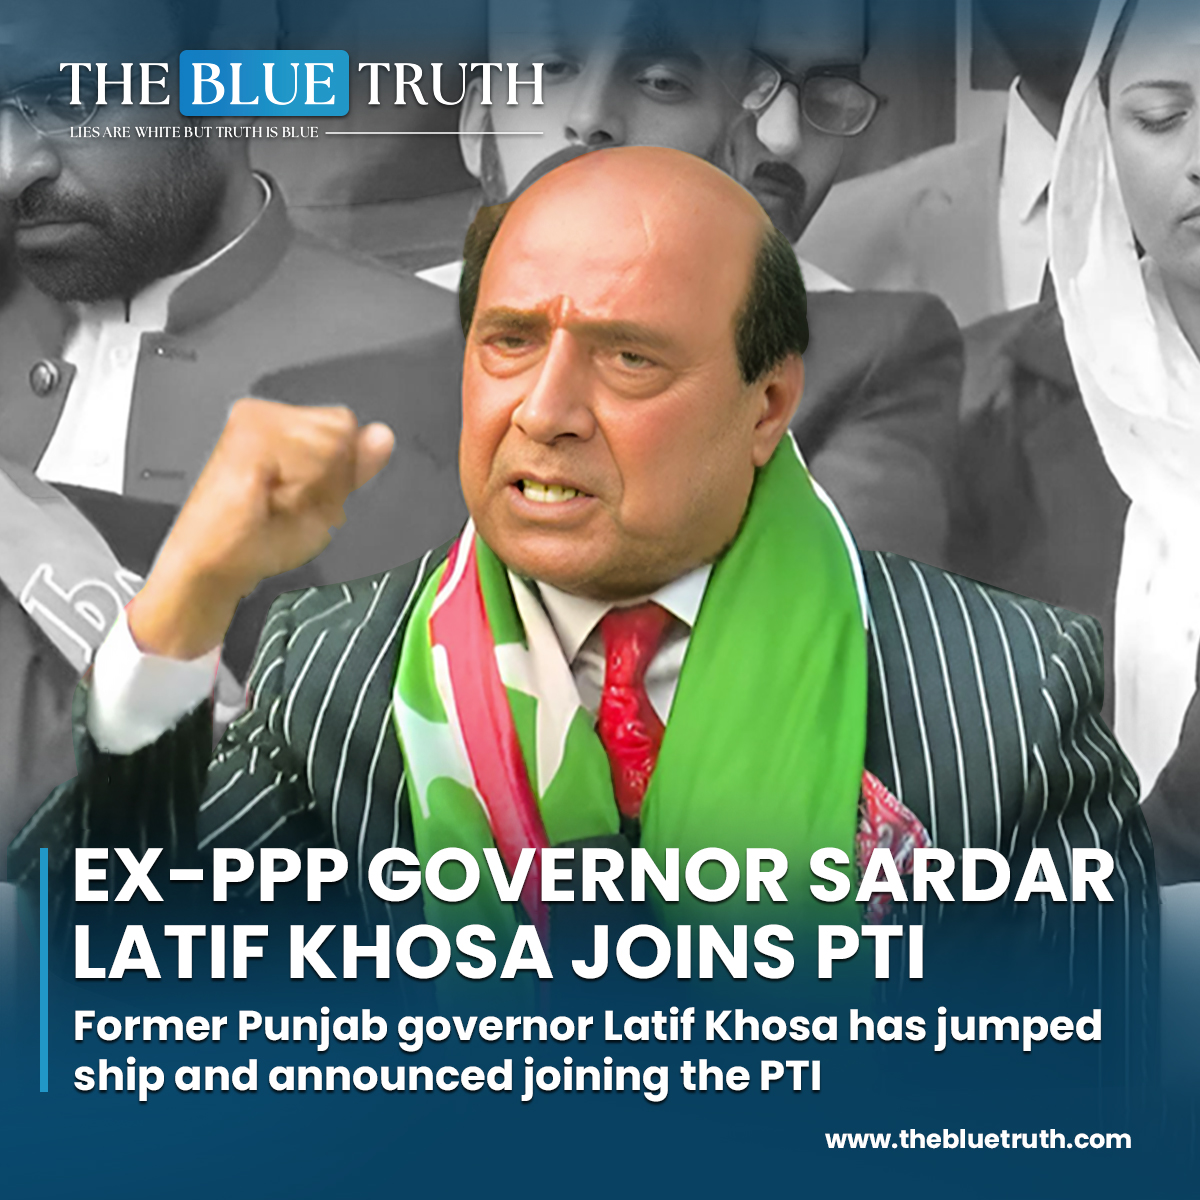 Sardar Latif Khosa joins PTI.
Former Punjab governor Latif Khosa has jumped ship and announced joining the PTI.

#LatifKhosa #PPP #PTI #PartySwitch #PoliticalTransition #tbt #TheBlueTruth